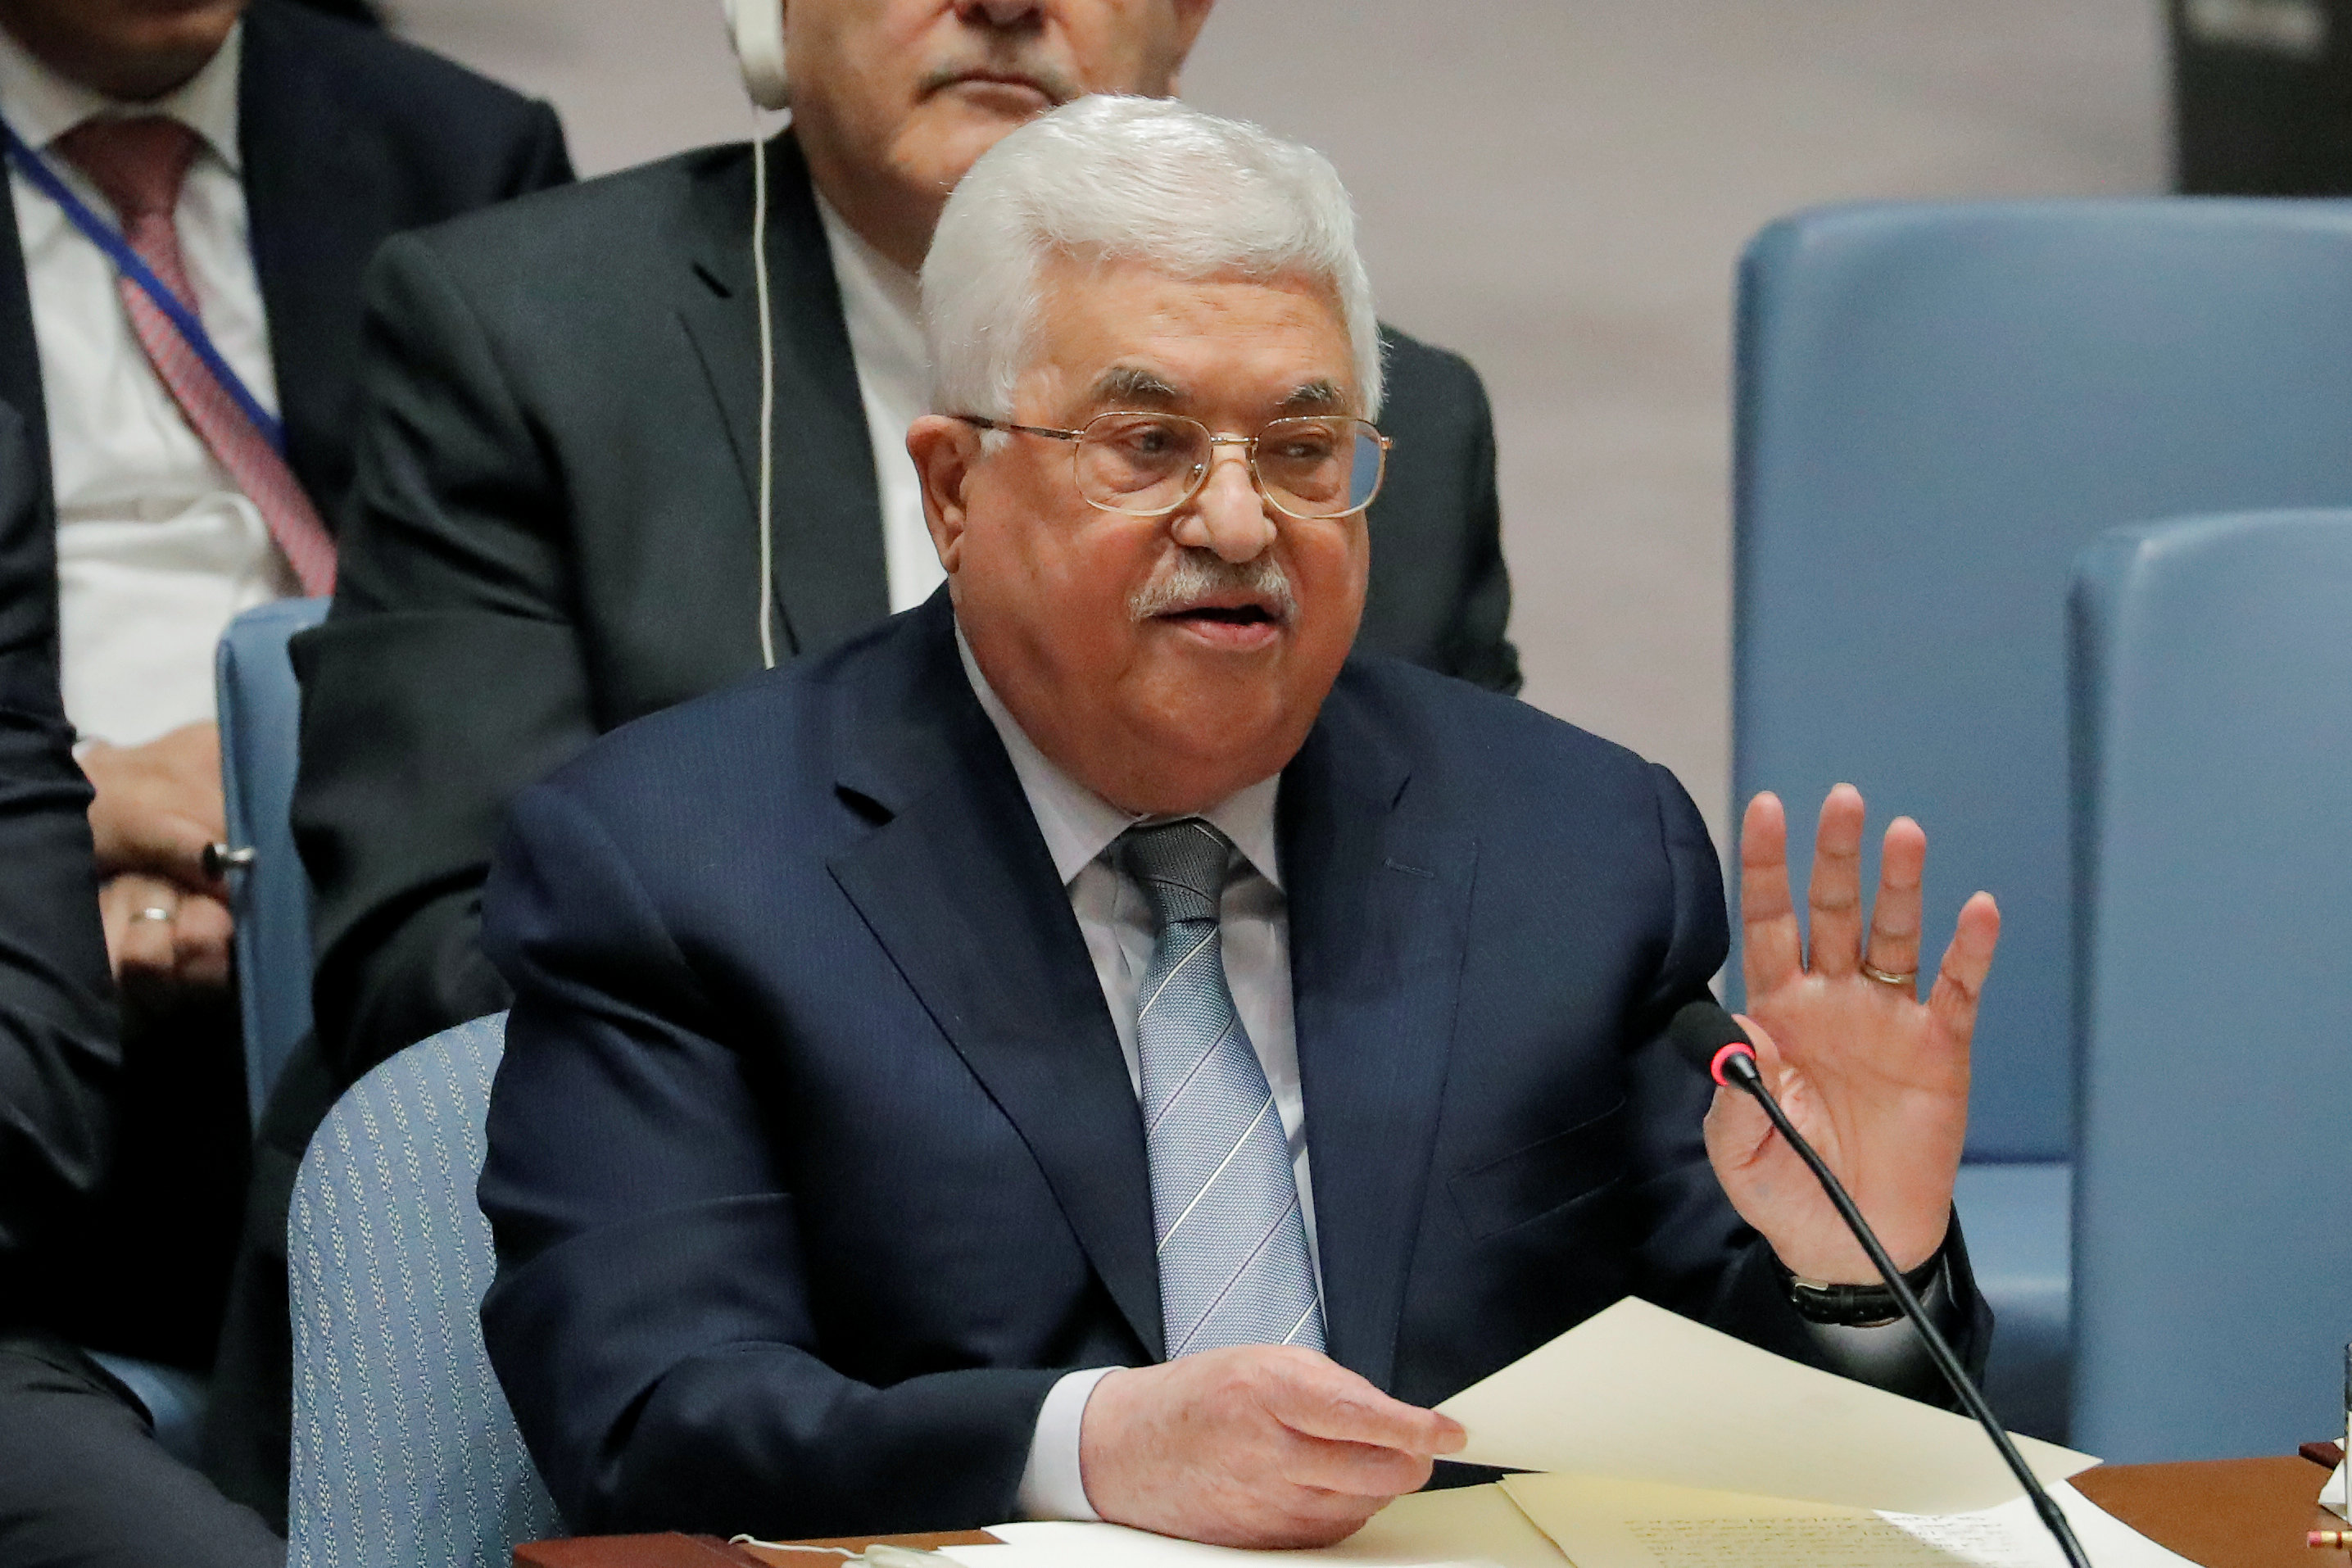 Abbas calls for international Mideast peace meet by mid-2018